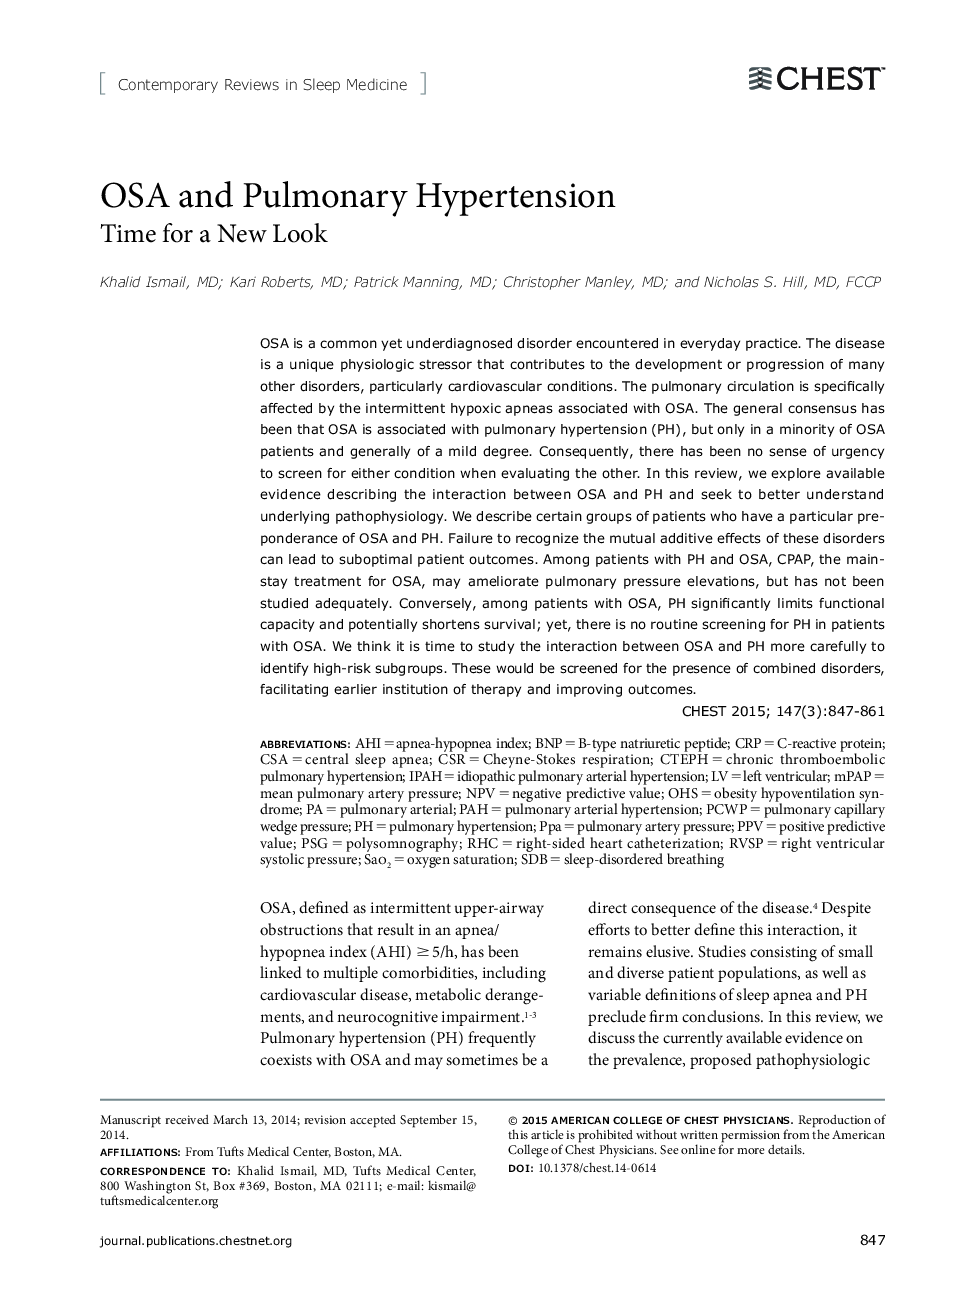 OSA and Pulmonary Hypertension : Time for a New Look